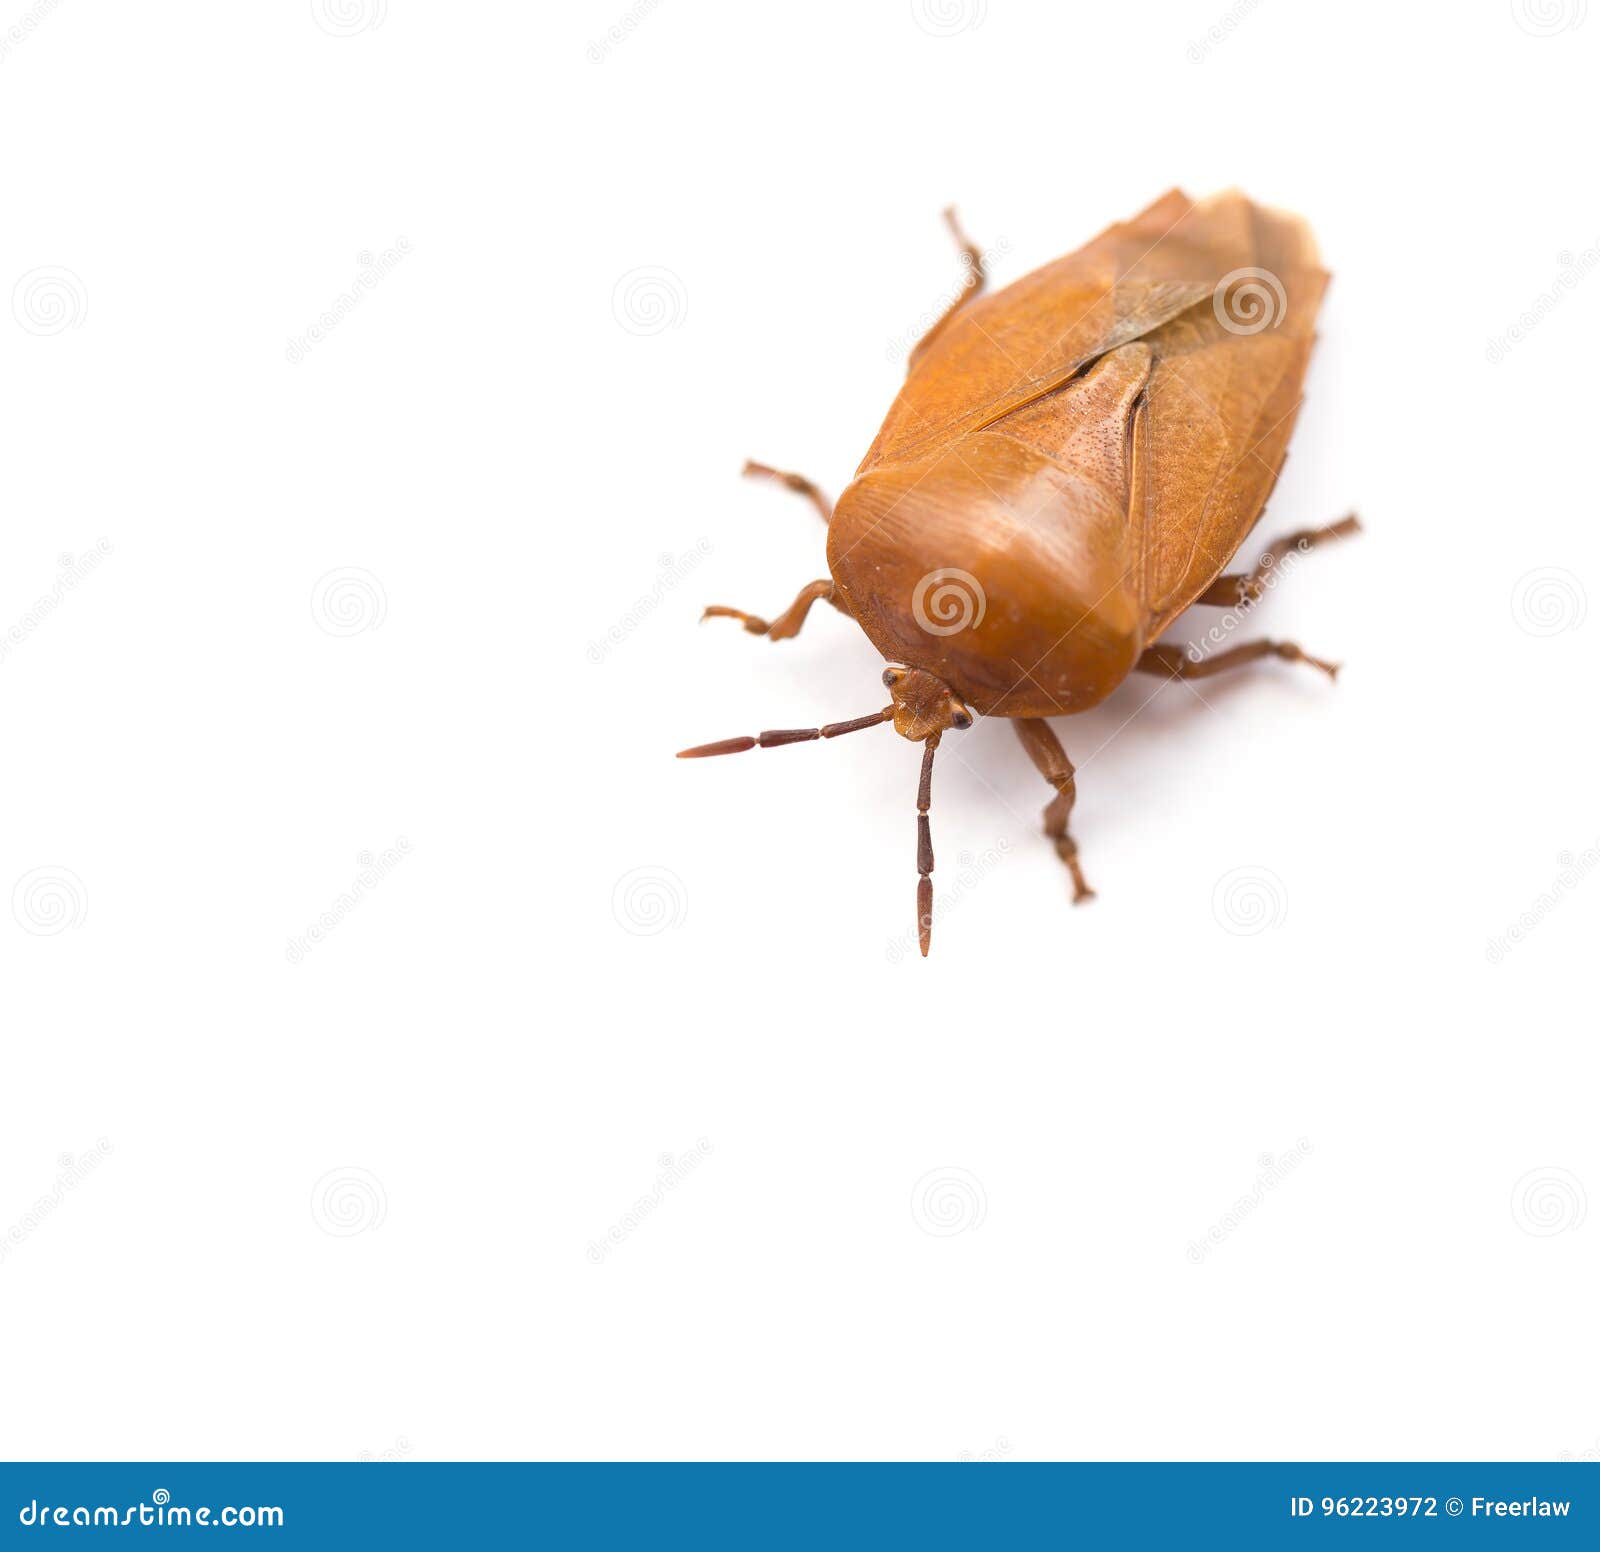 Bed bug bites: Pictures, treatment, and prevention